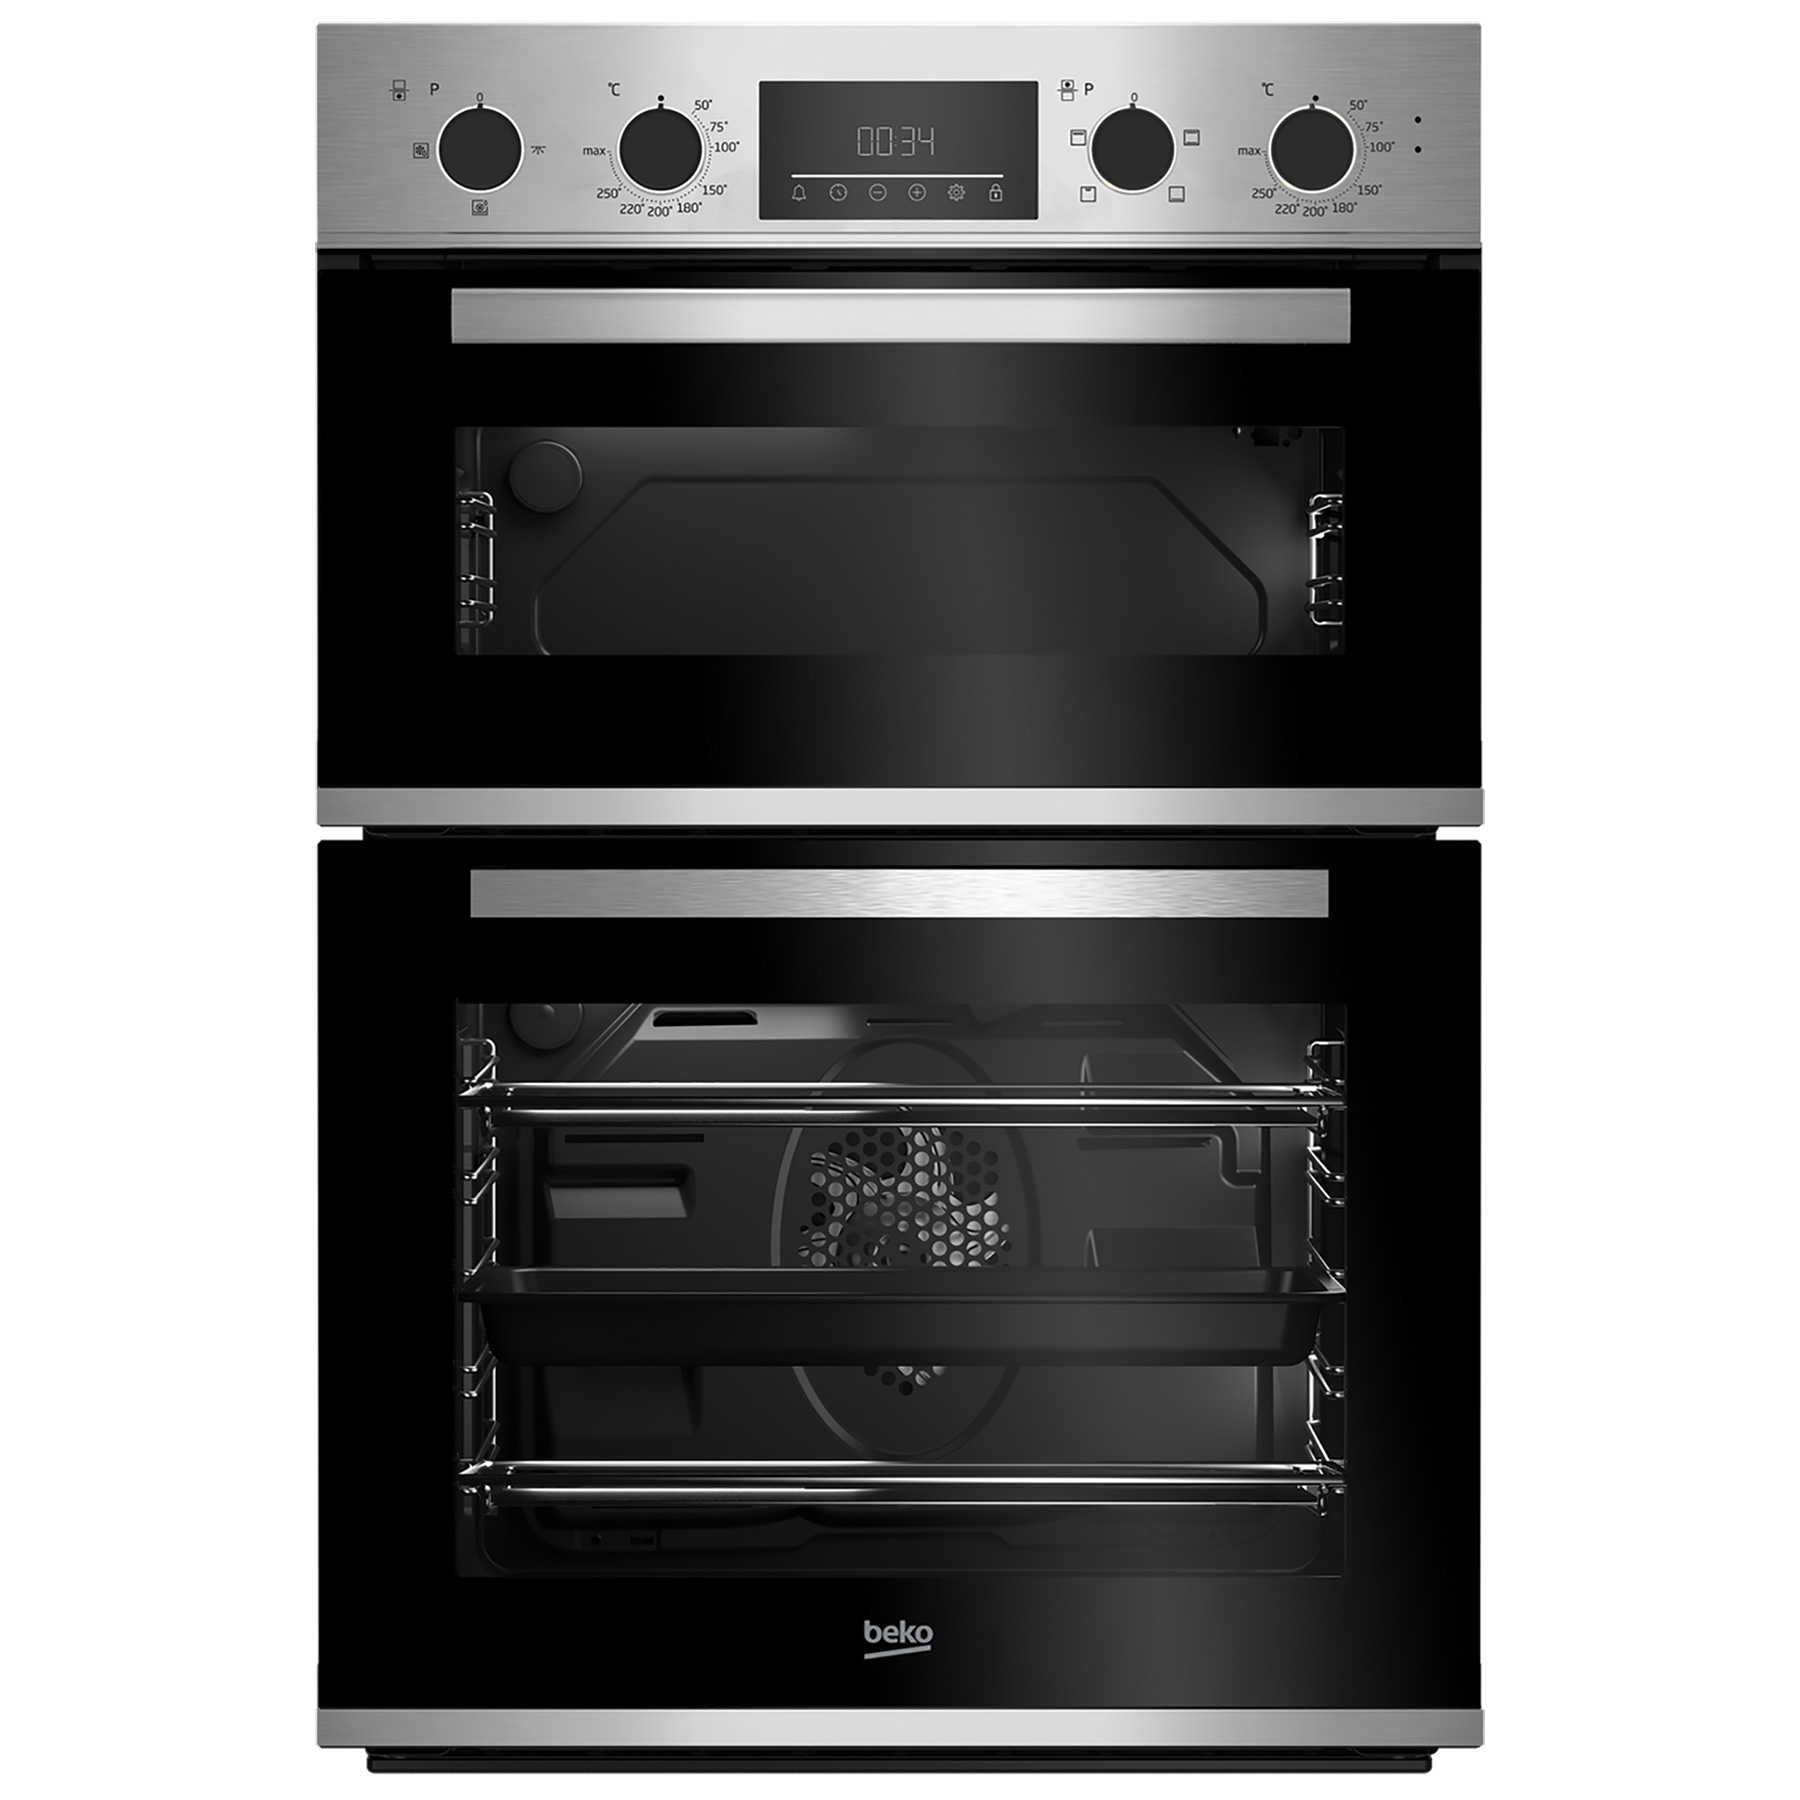 Image of Beko CDFY22309X Built In Electric Double Oven in St Steel A Rated